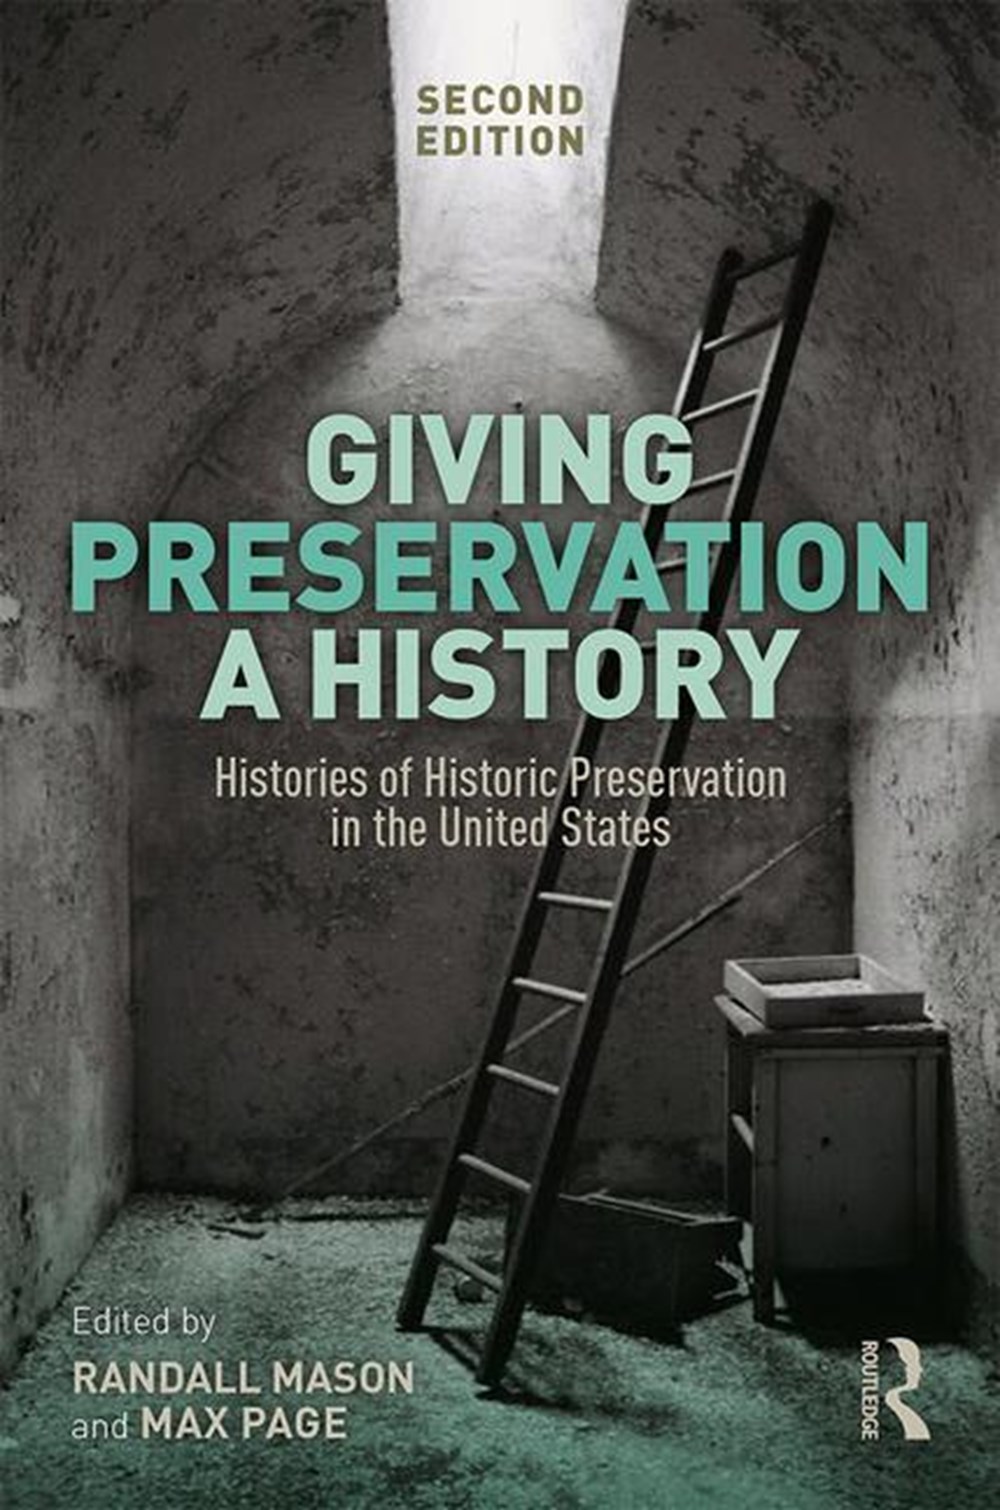 Giving Preservation a History: Histories of Historic Preservation in the United States